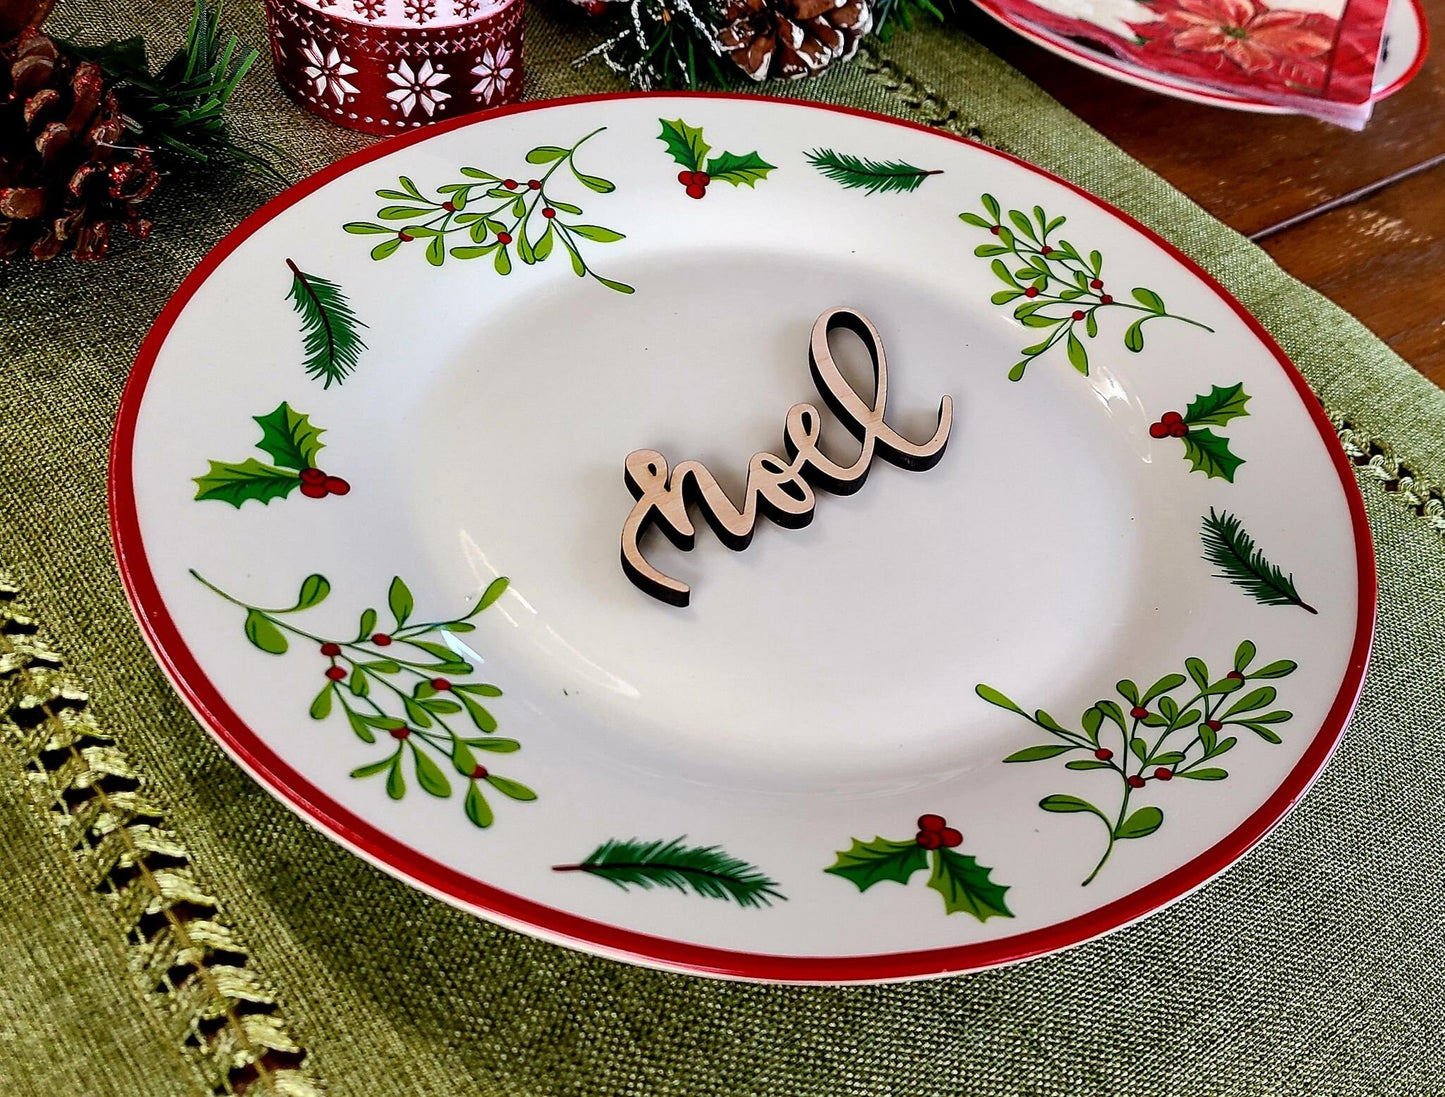 Noel Place Cards, Christmas Plate setting cards, Christmas Wooden Word, Holiday Decor, Christmas Place settings, Small Wood Noel Sign